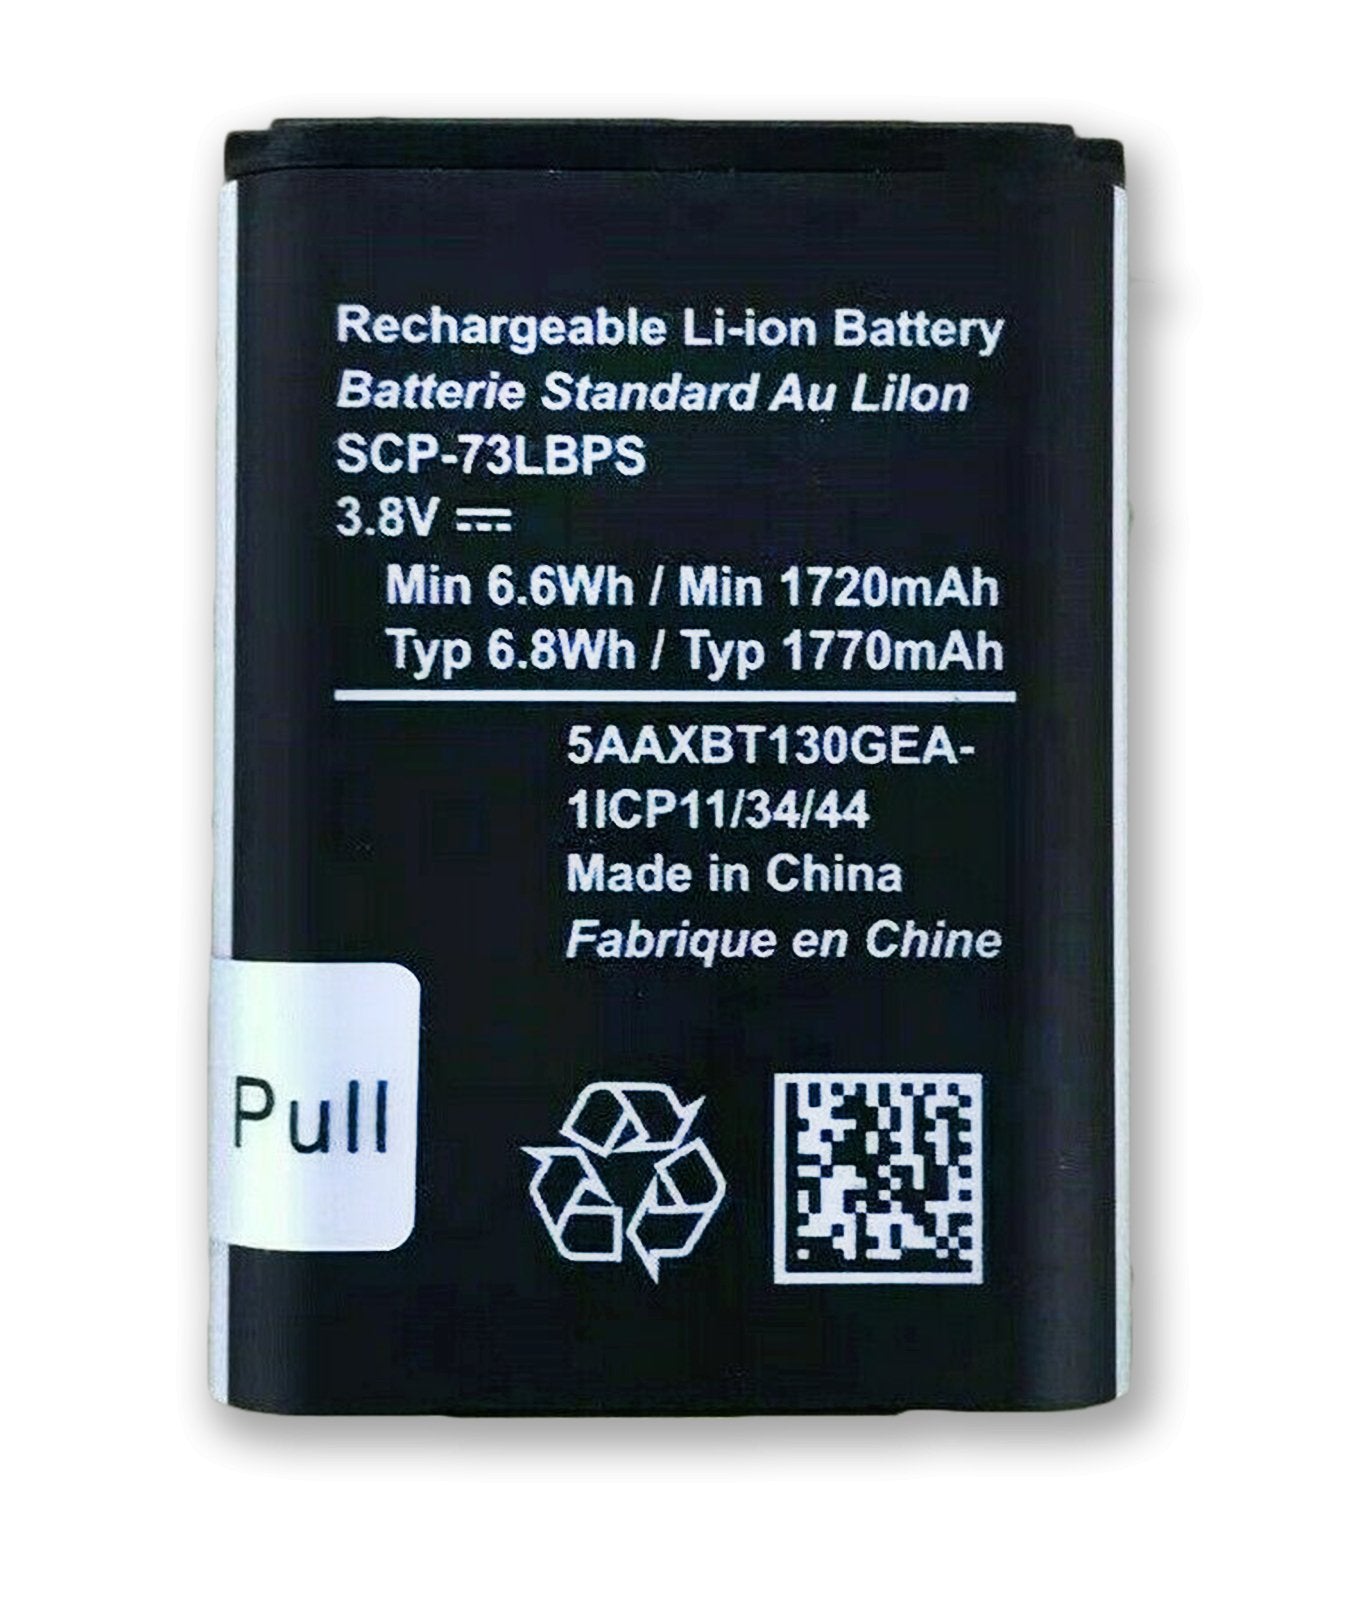 Kyocera DuraXV Extreme E4810 SCP-73LBPS Replacement Battery - Battery World